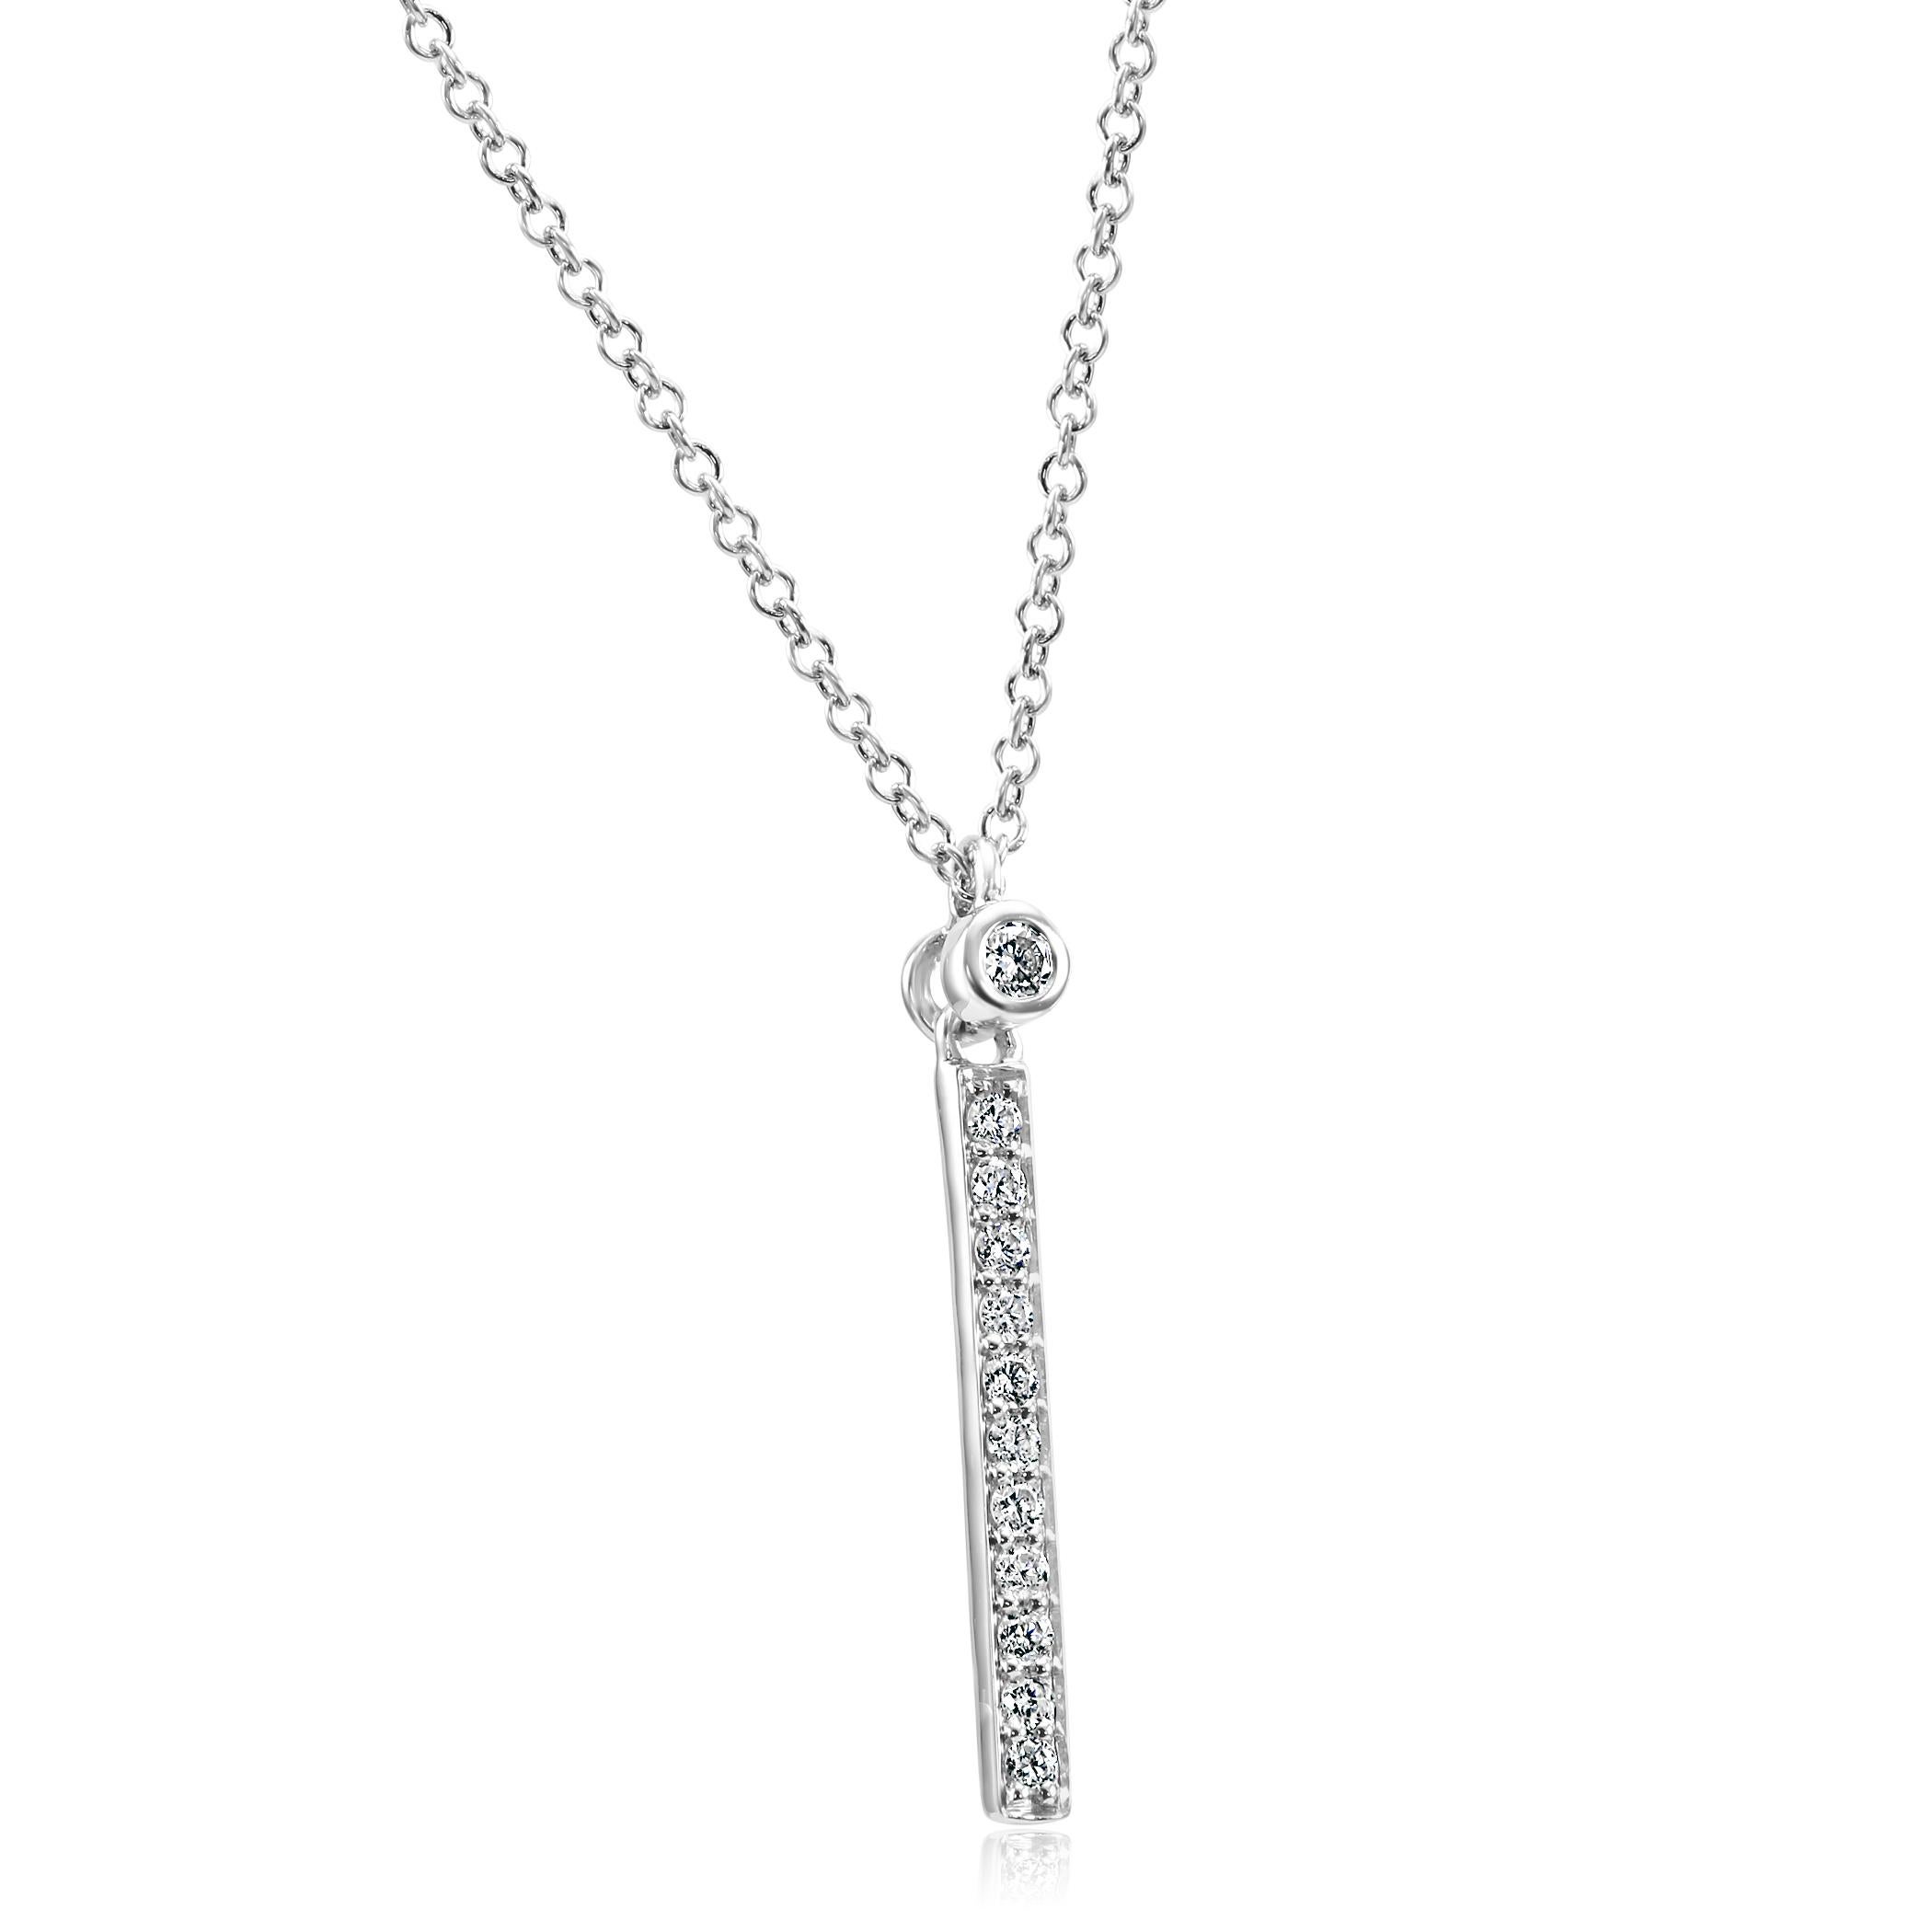 12 White Colorless SI Clarity Diamond Rounds 0.16 Carat Set in Stylish everyday wear 14K White Gold Diamond Bar style Dangle Drop Pendant Chain Necklace. Can be worn as 18 inches or 16 inches. 

Total Diamond Weight 0.16 Carat

Style available in